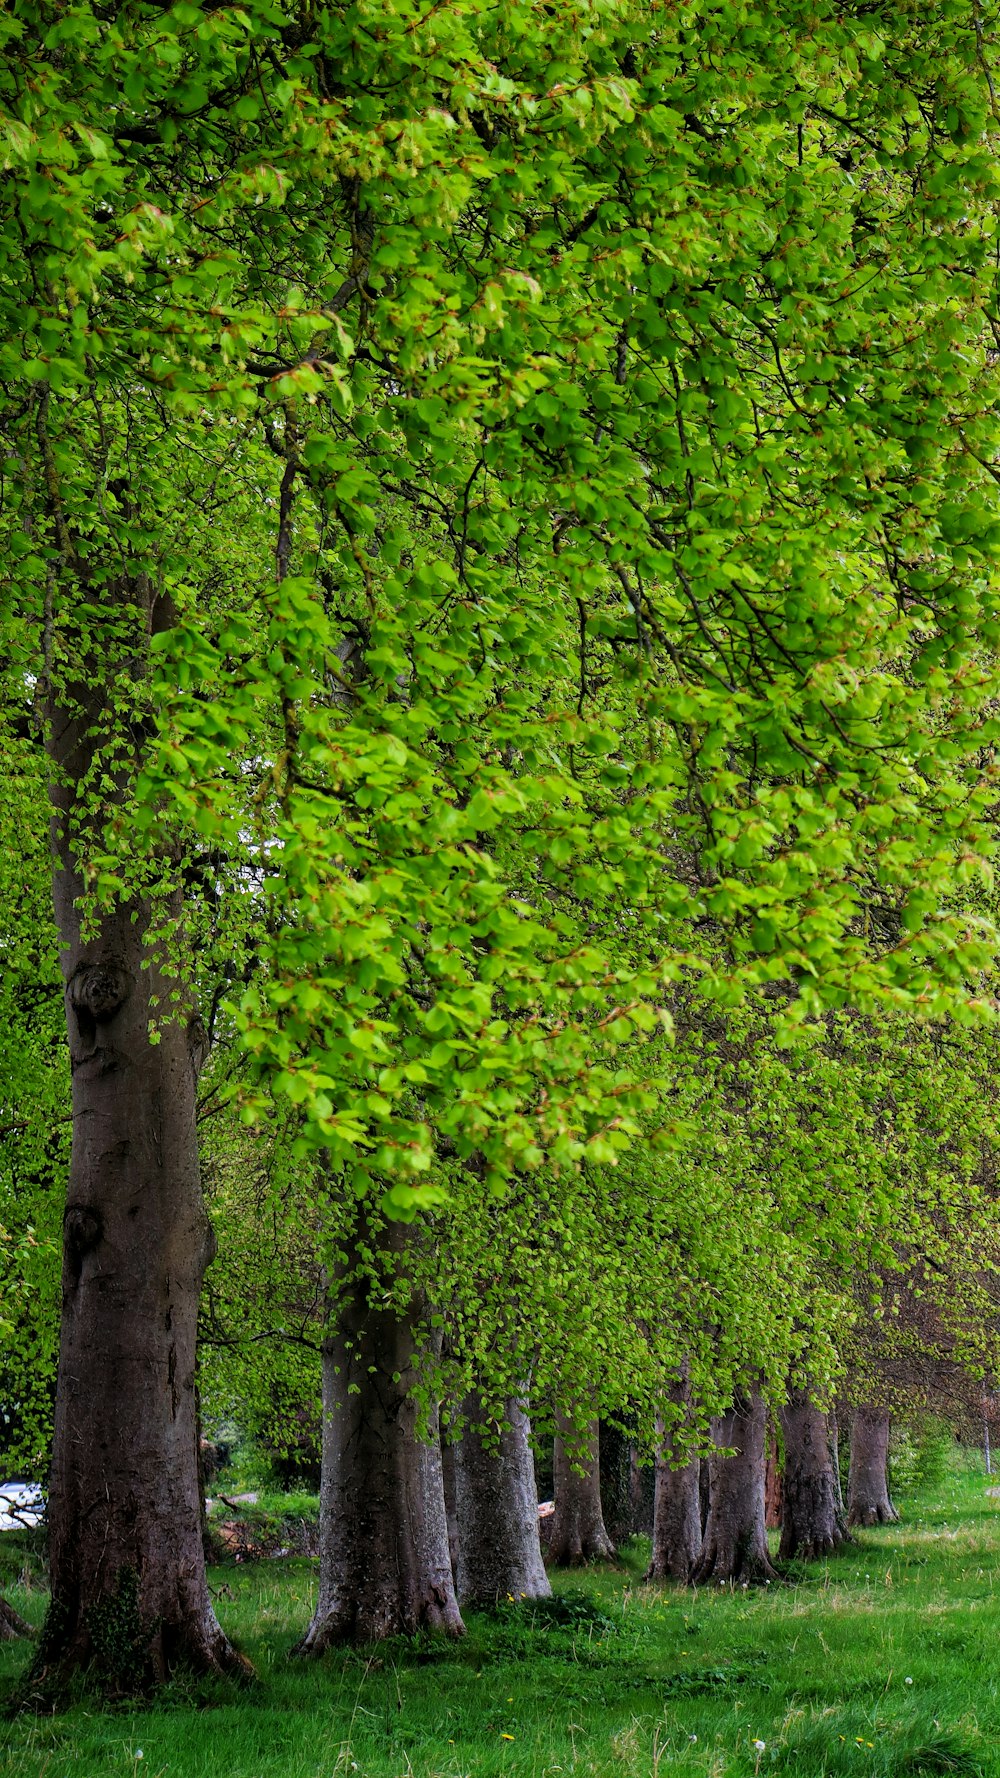 a row of trees with green leaves in a park